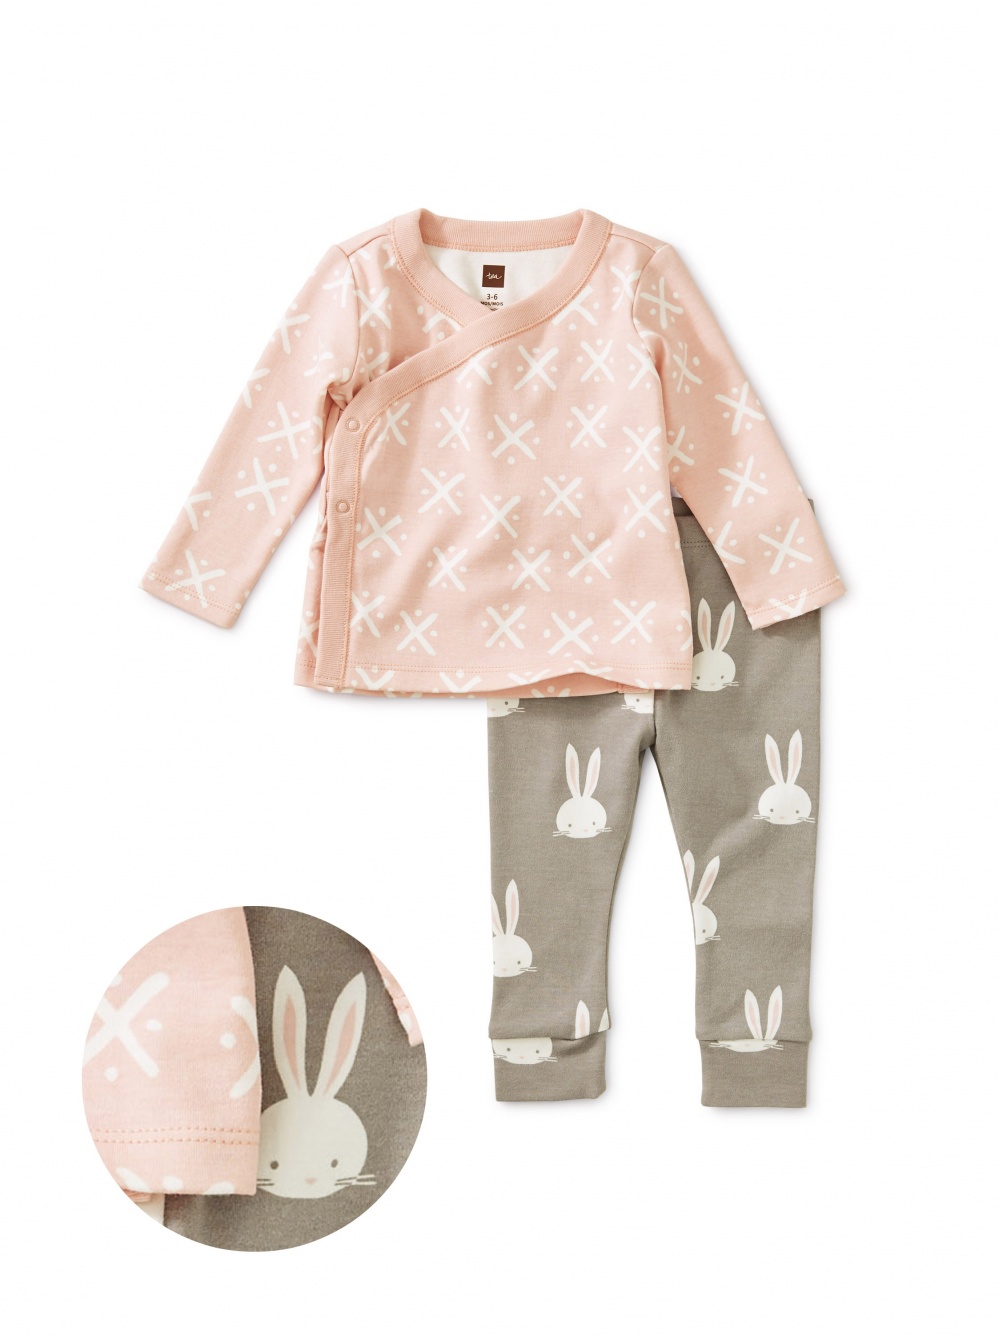 Wrap Top Baby Outfit